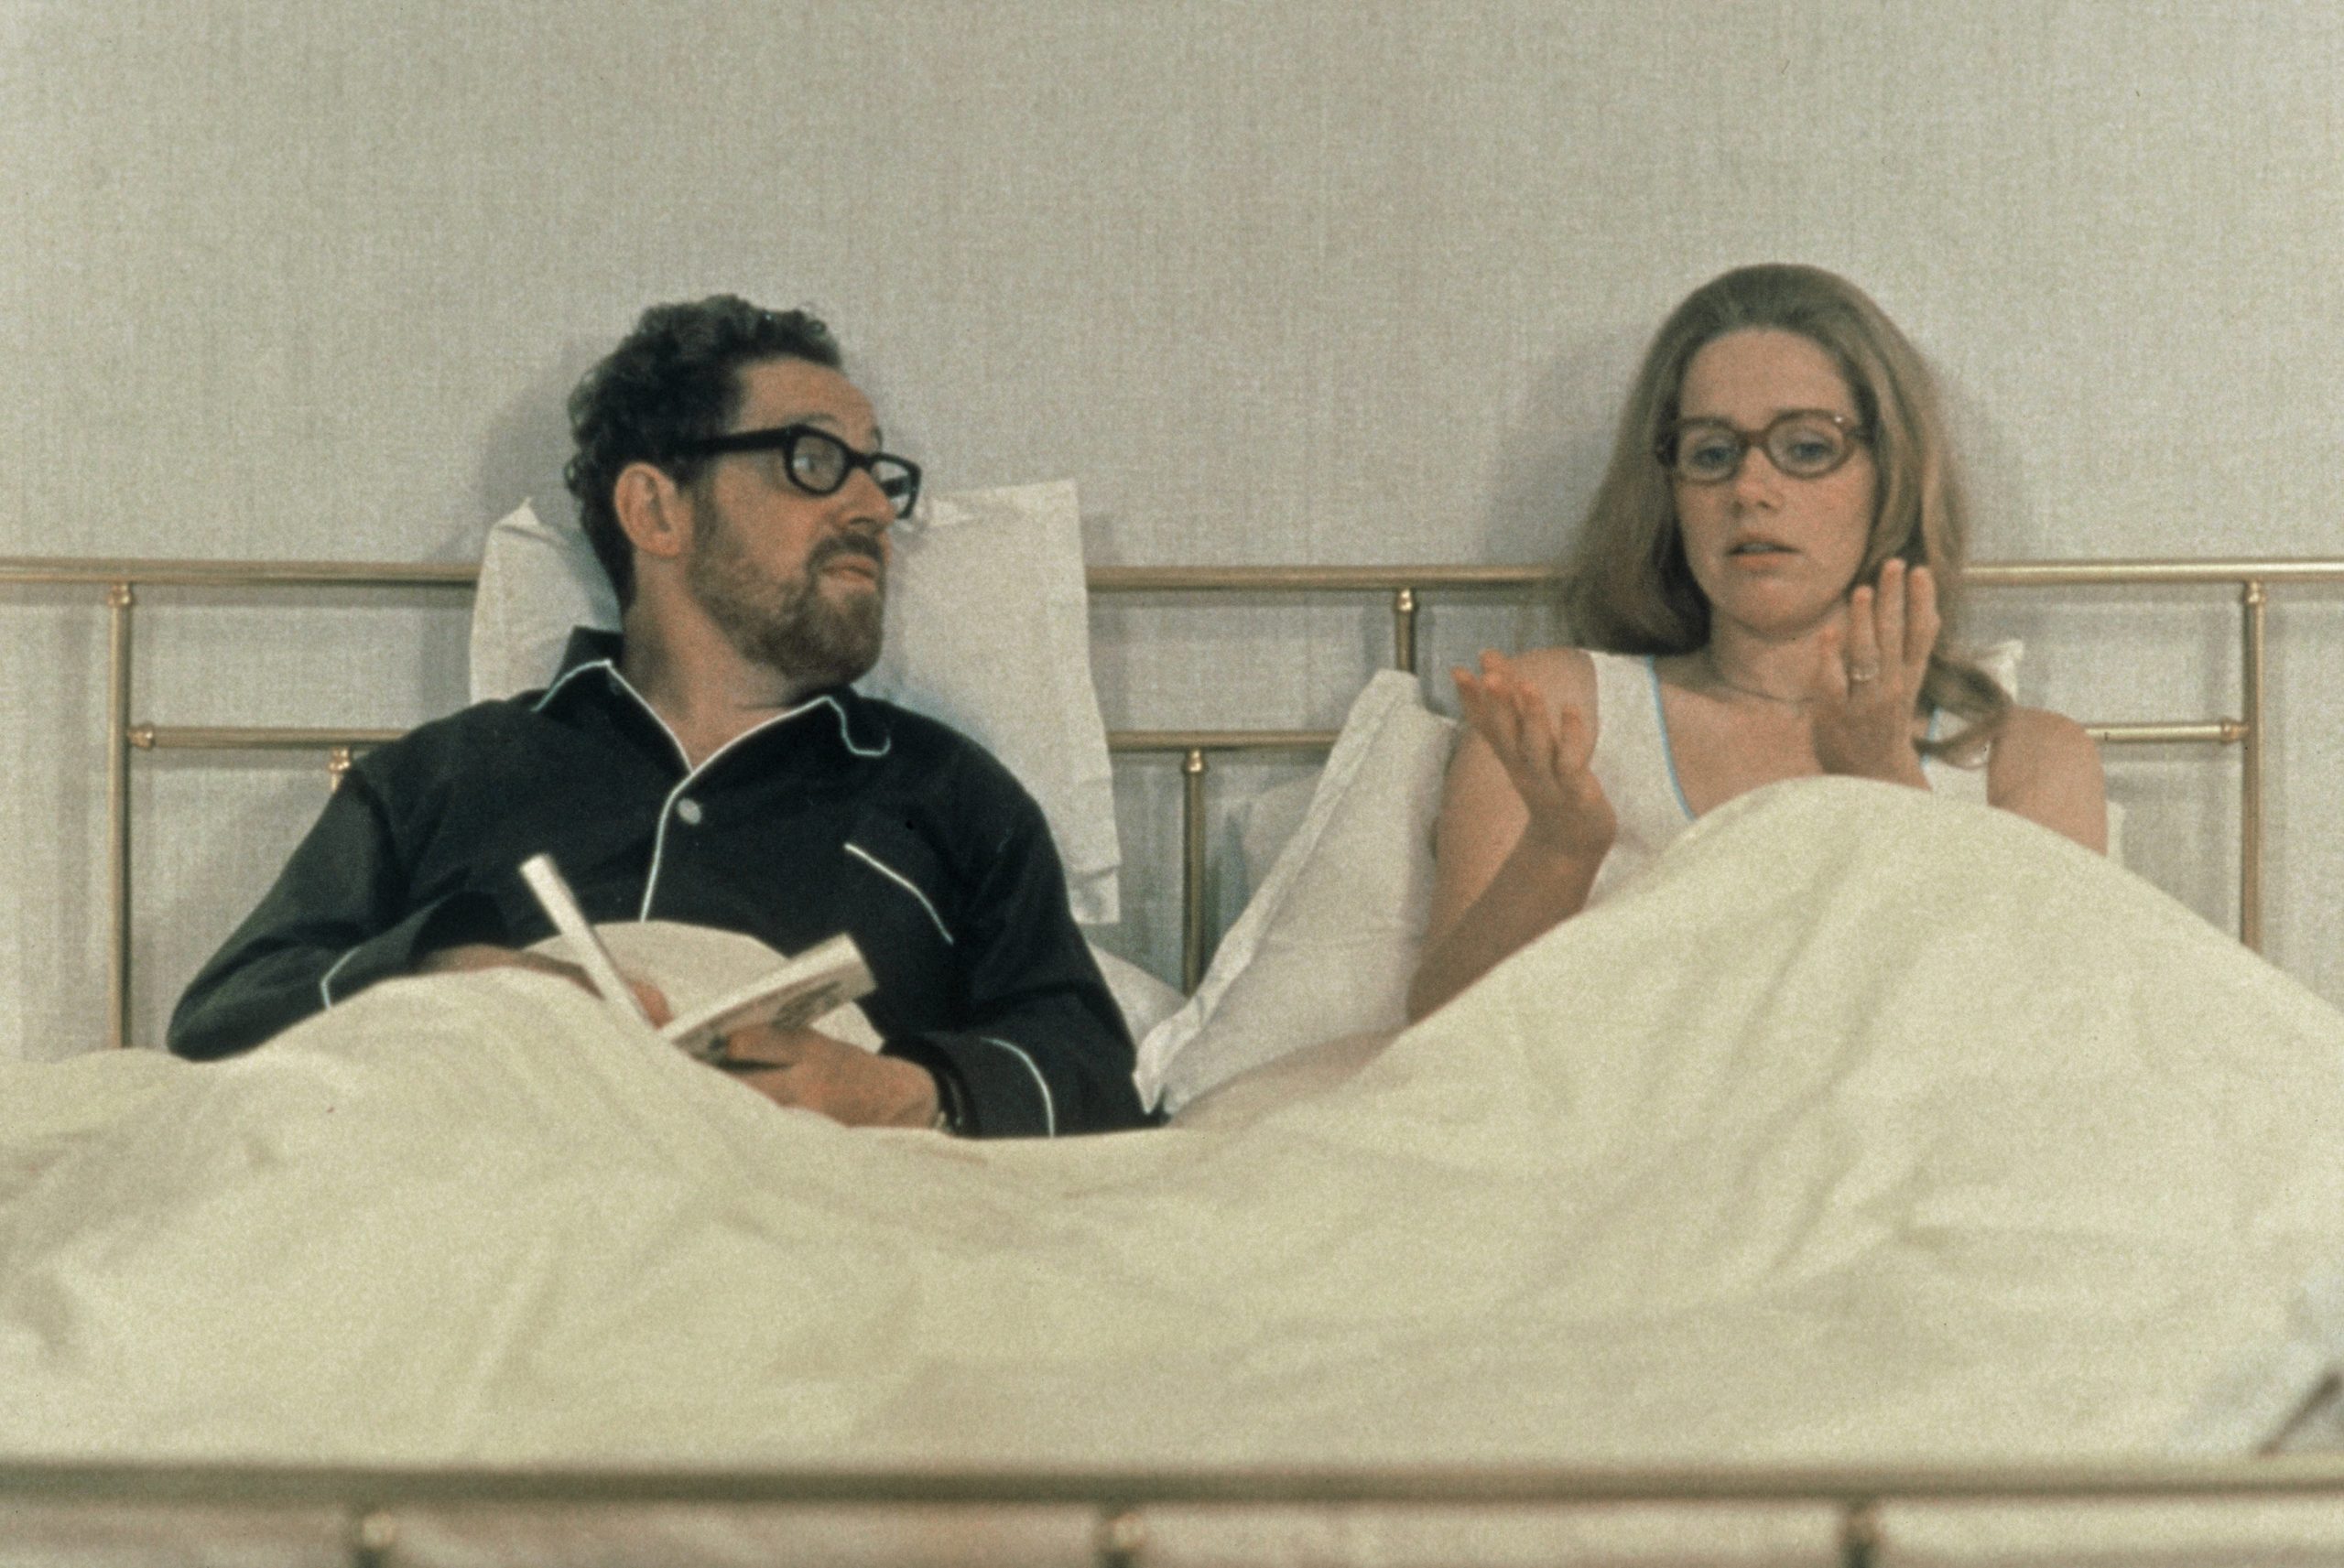 Scenes From a Marriage, 1973